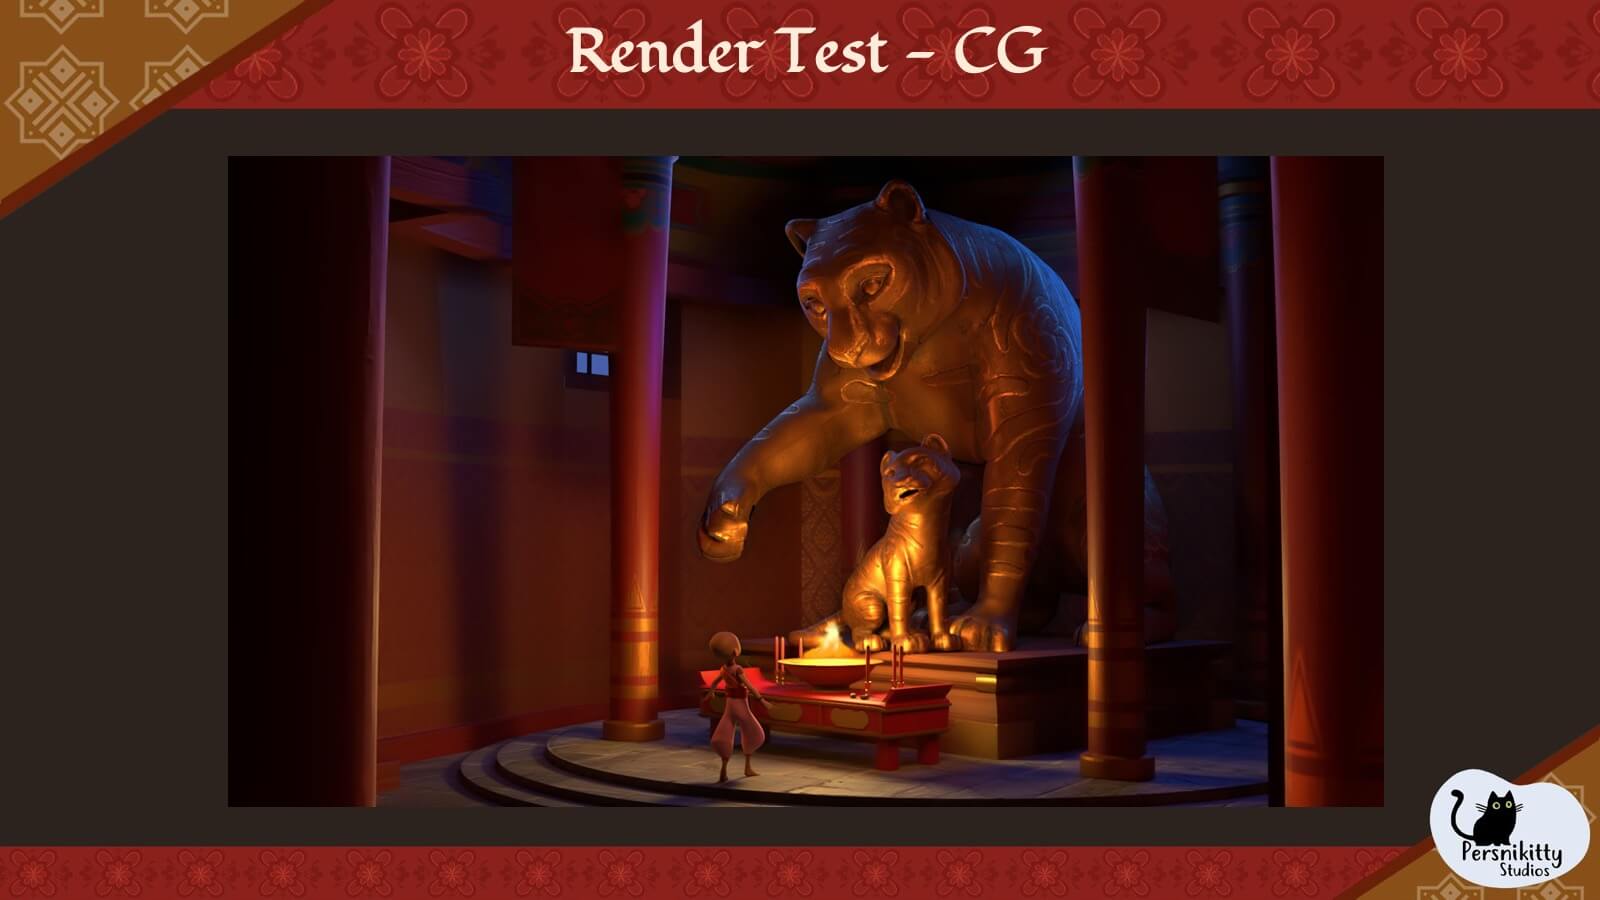 A slide displaying a CG render test from a scene in the film.